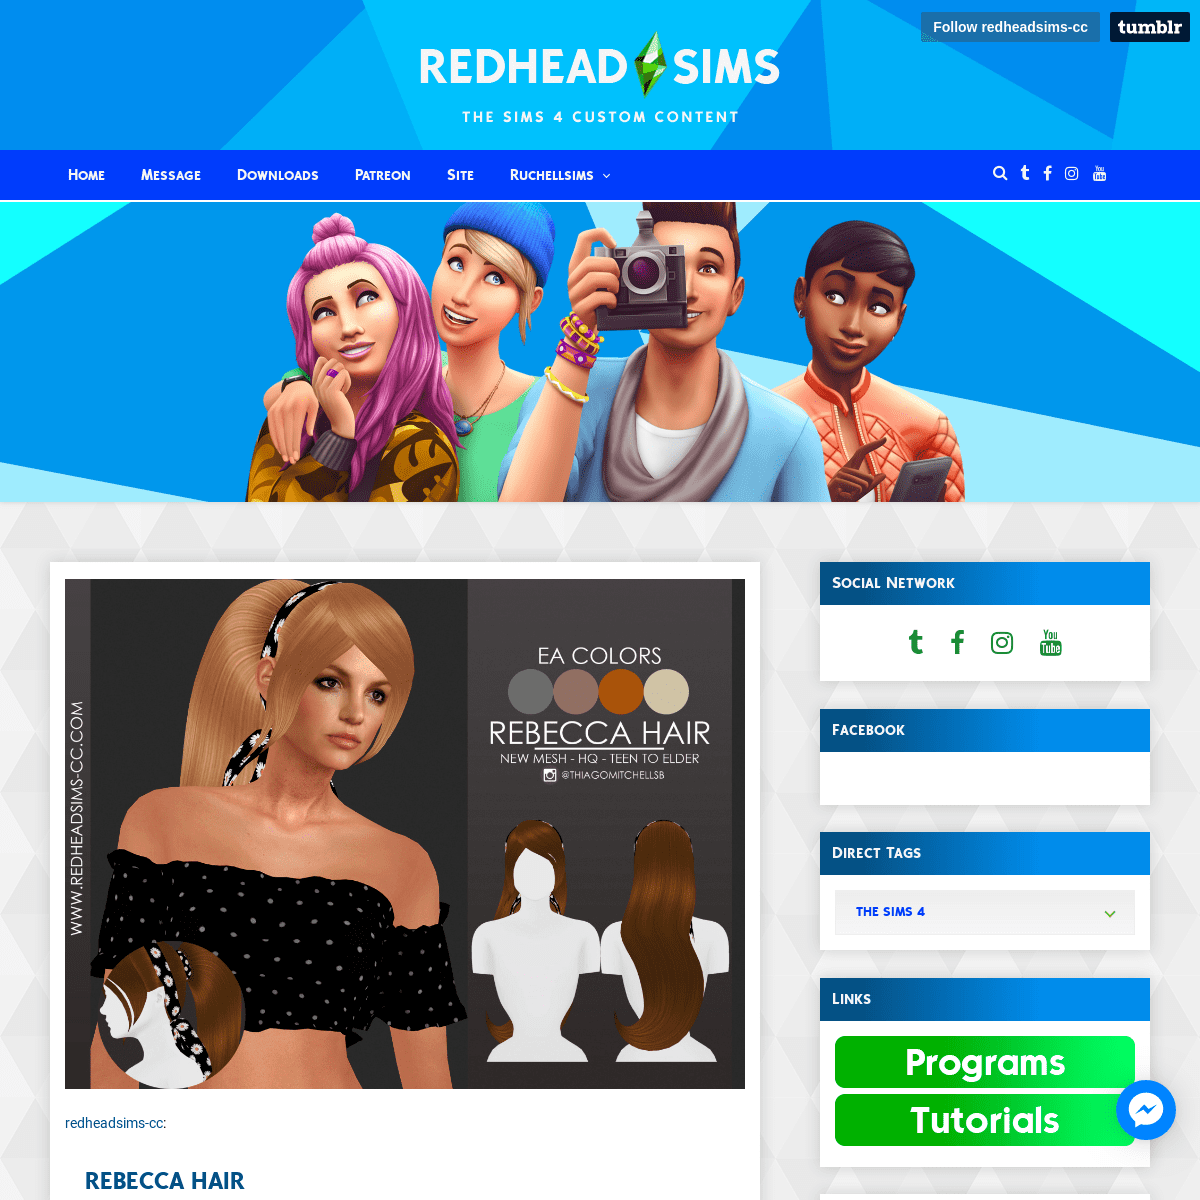 A complete backup of redheadsims-cc.tumblr.com